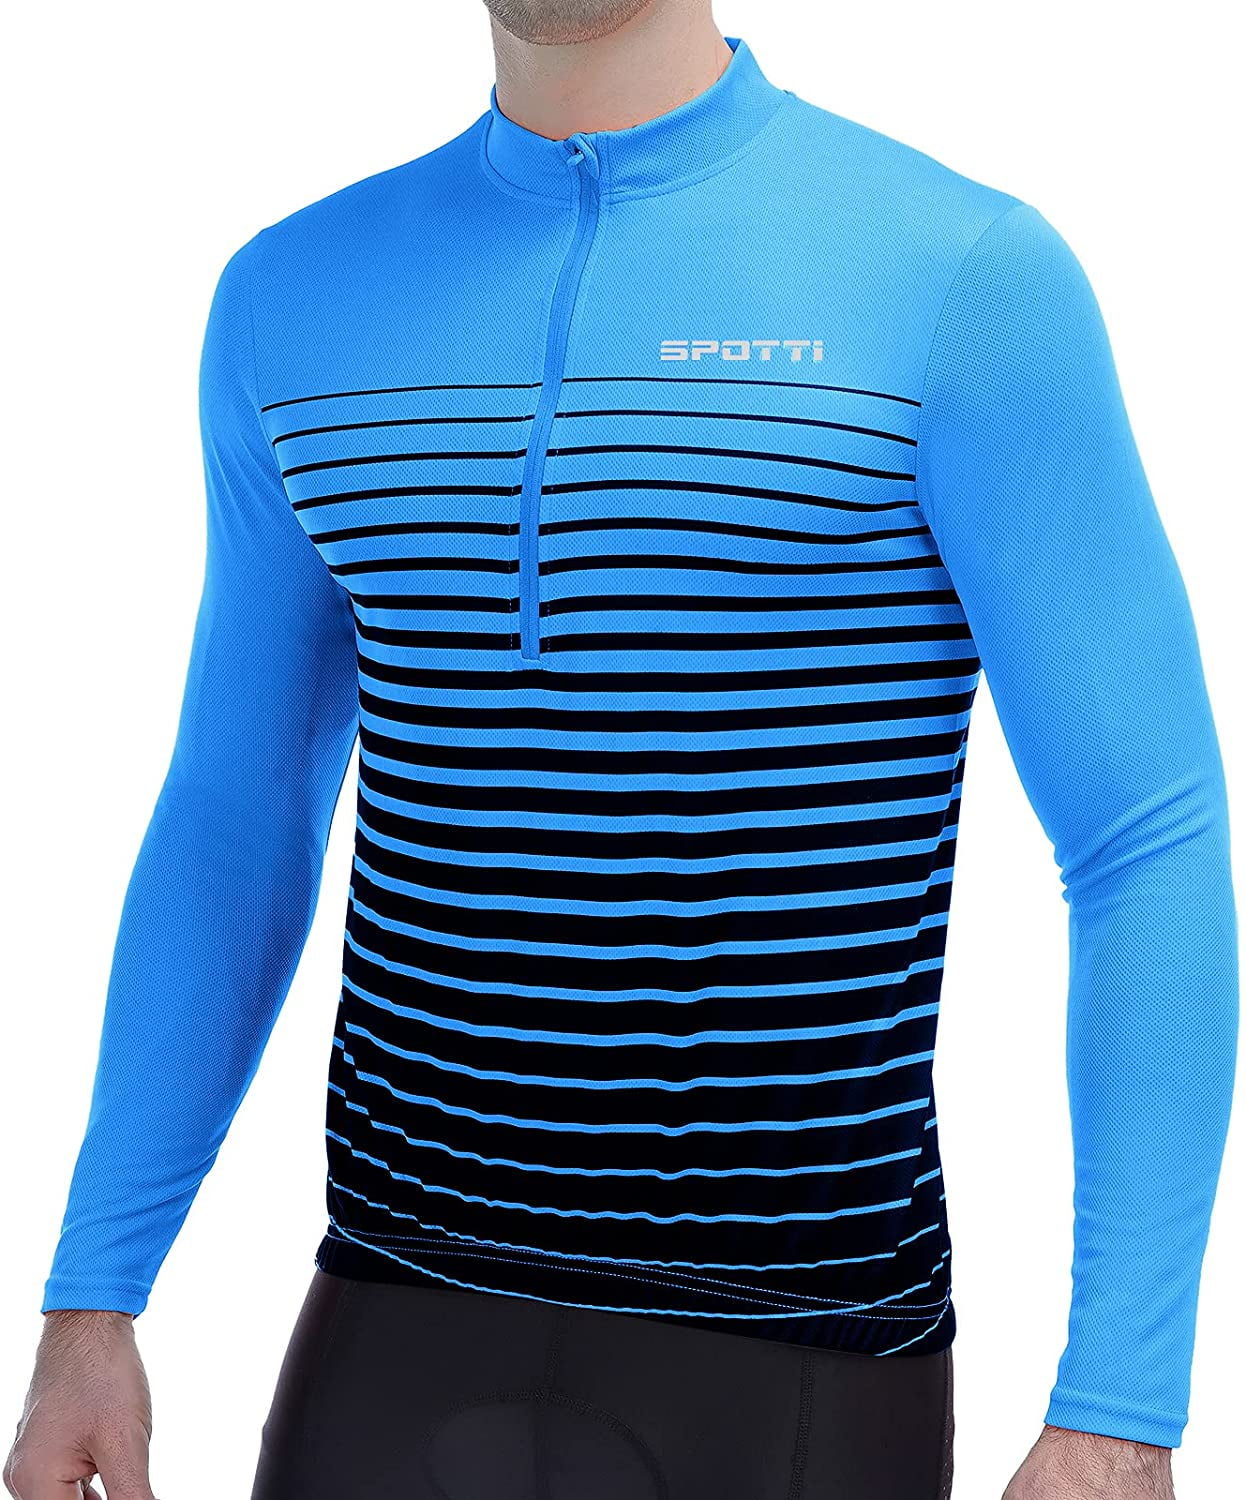 Spotti Mens Cycling Bike Jersey Long Sleeve with 3 Rear Pockets Quick Dry Biking Shirt Moisture Wicking Breathable 